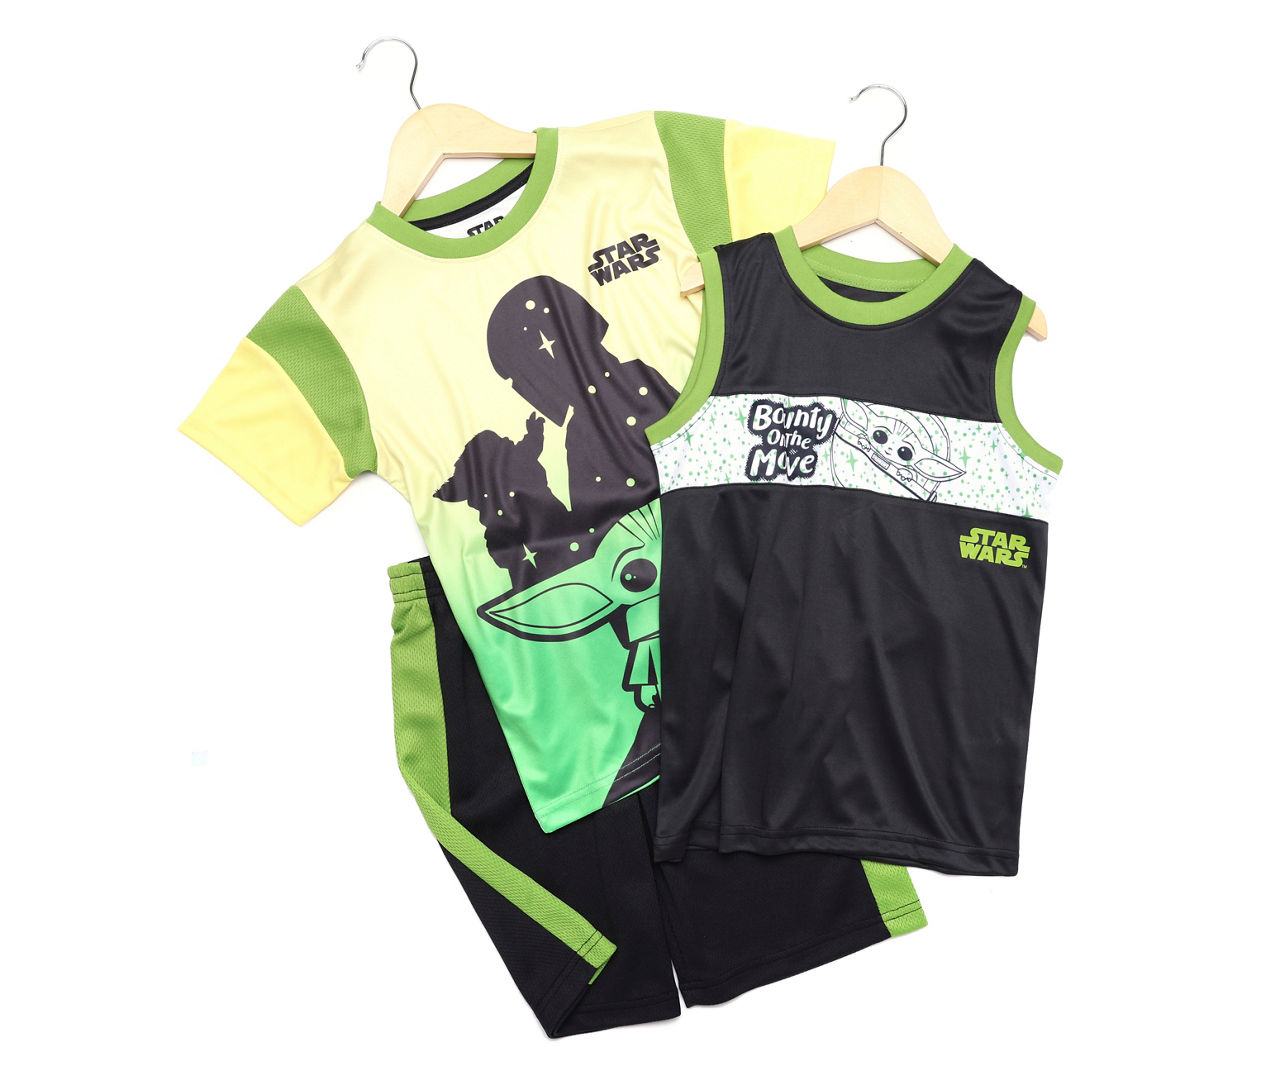 Toddler Size 3T Green & Black Grogu 3-Piece Performance Outfit